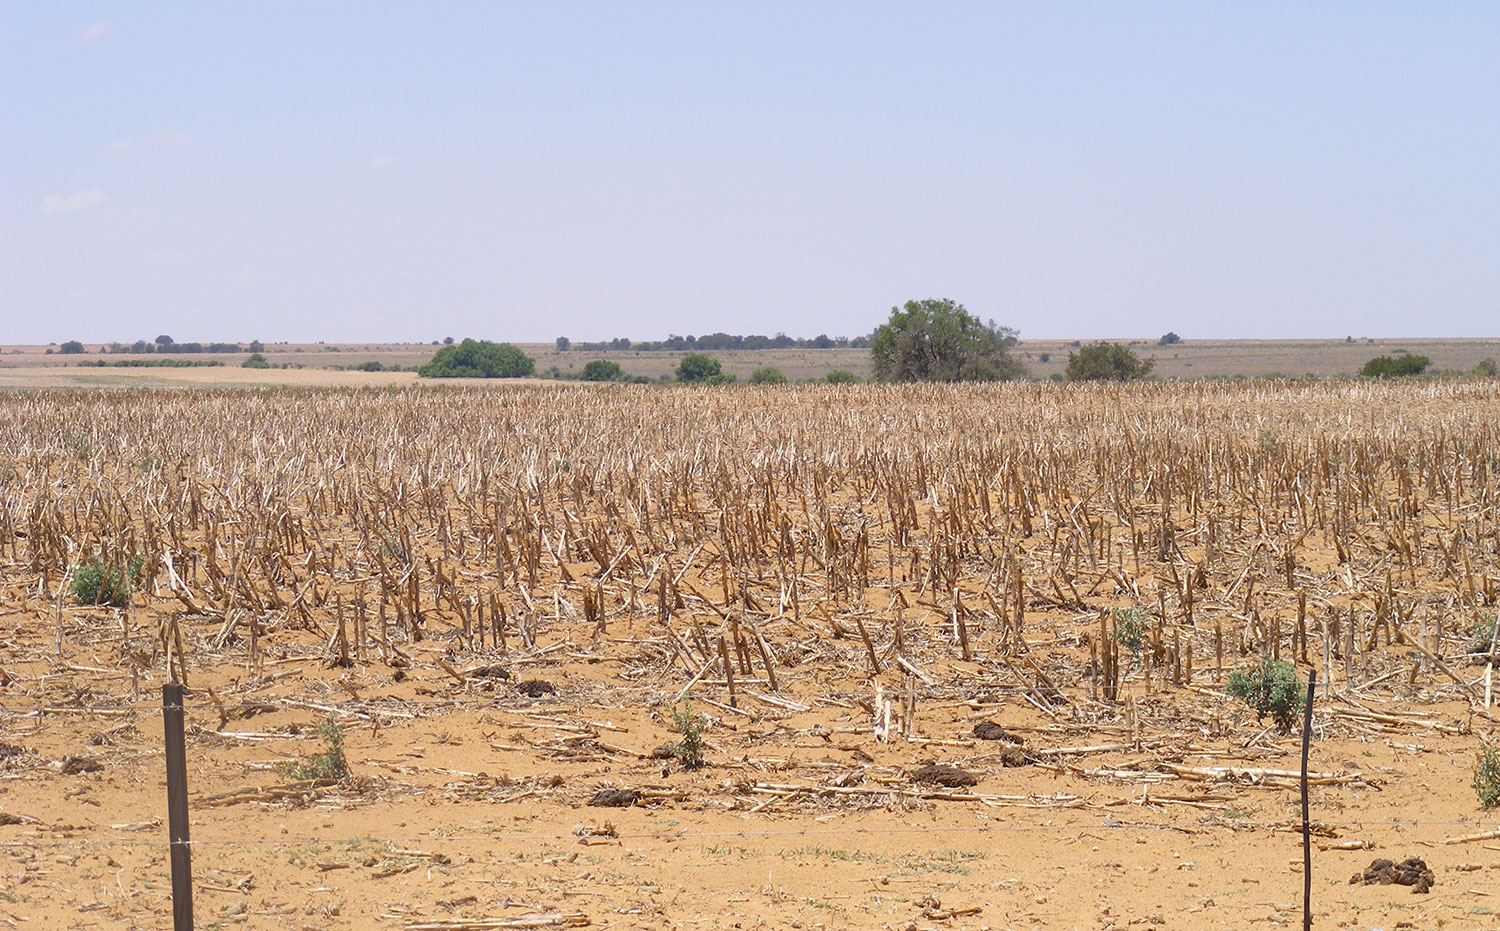 Drought depletes farmers’ cash flow in Northern Cape